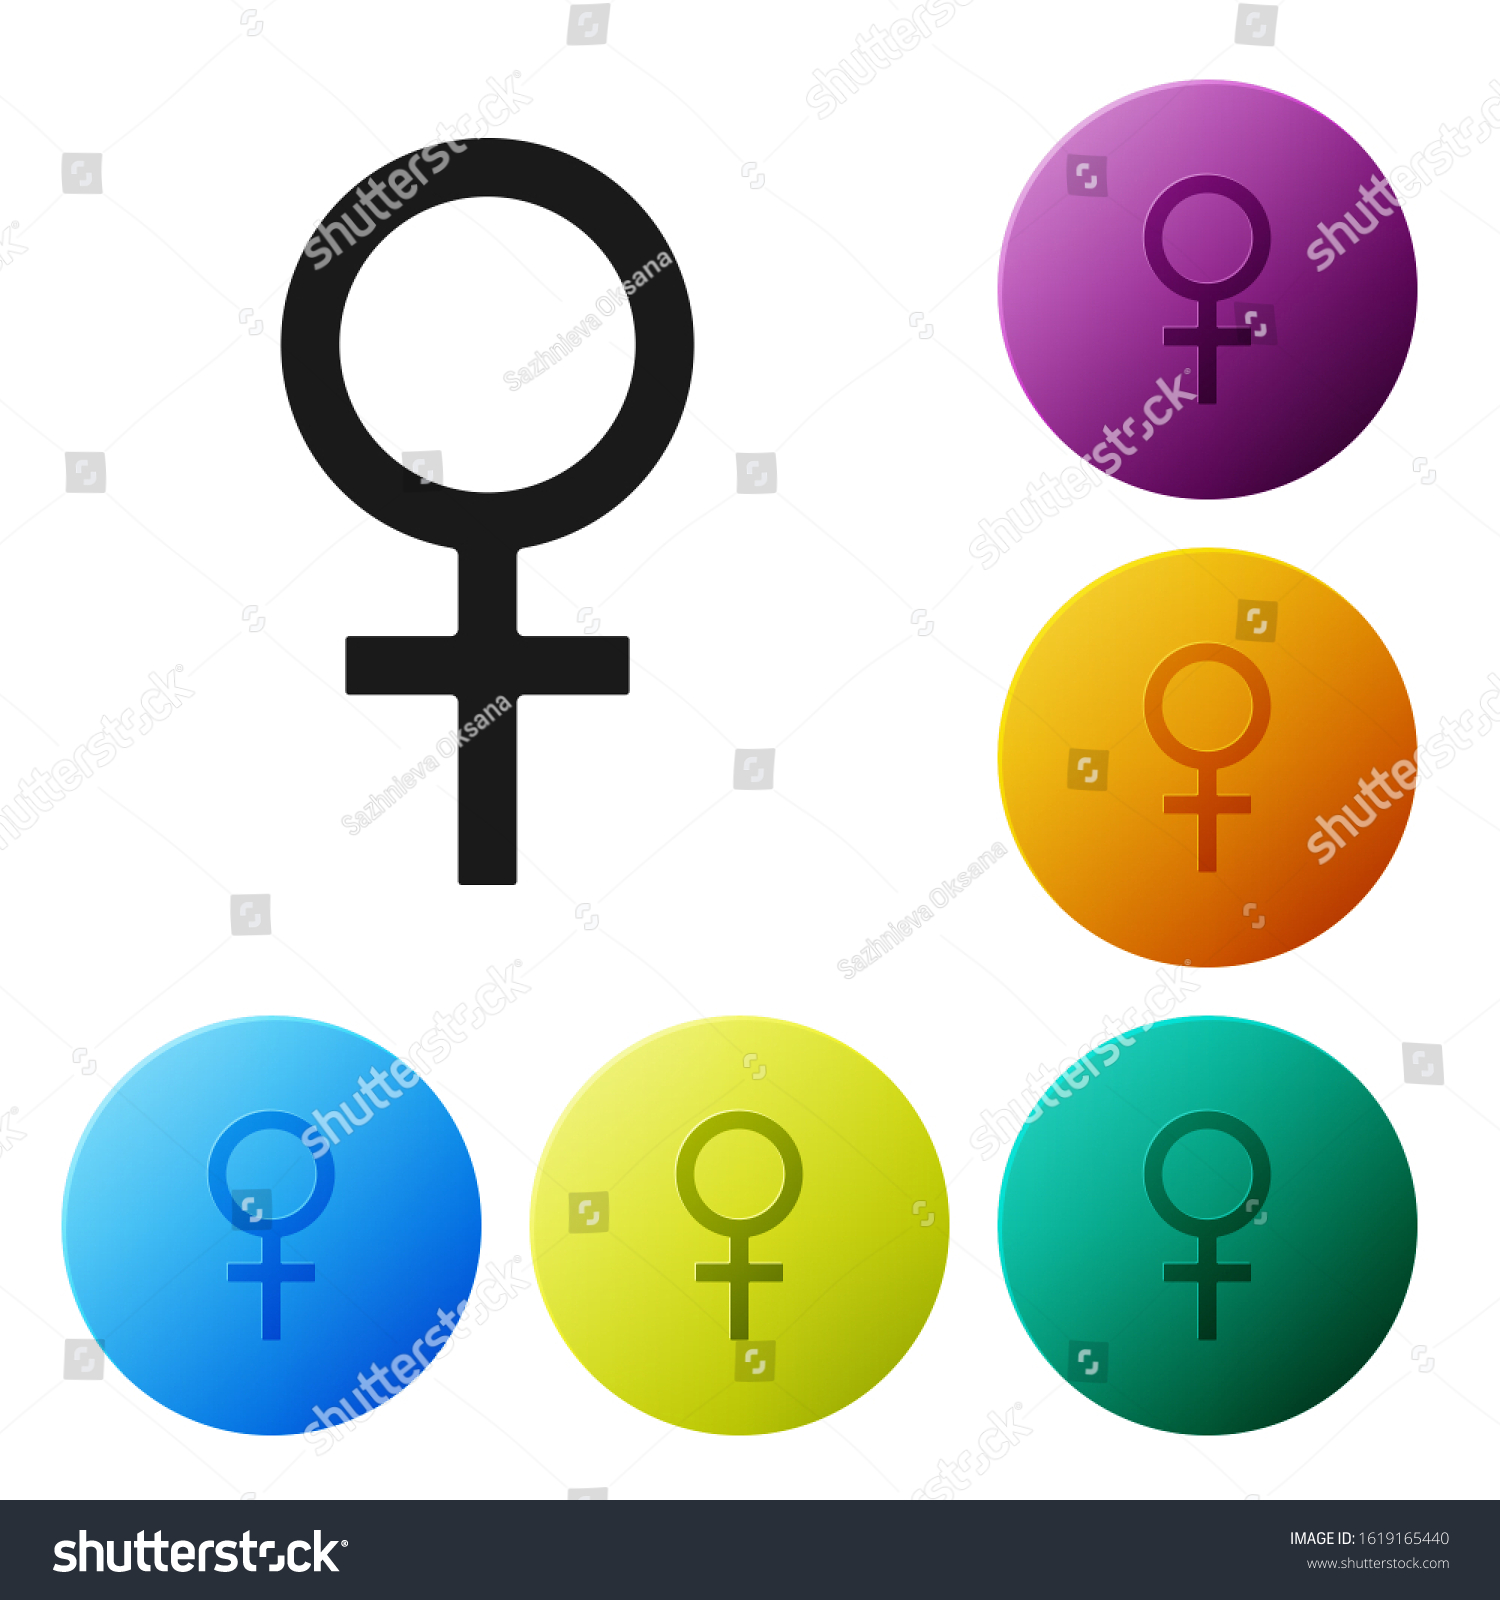 Black Female Gender Symbol Icon Isolated On Royalty Free Stock Vector